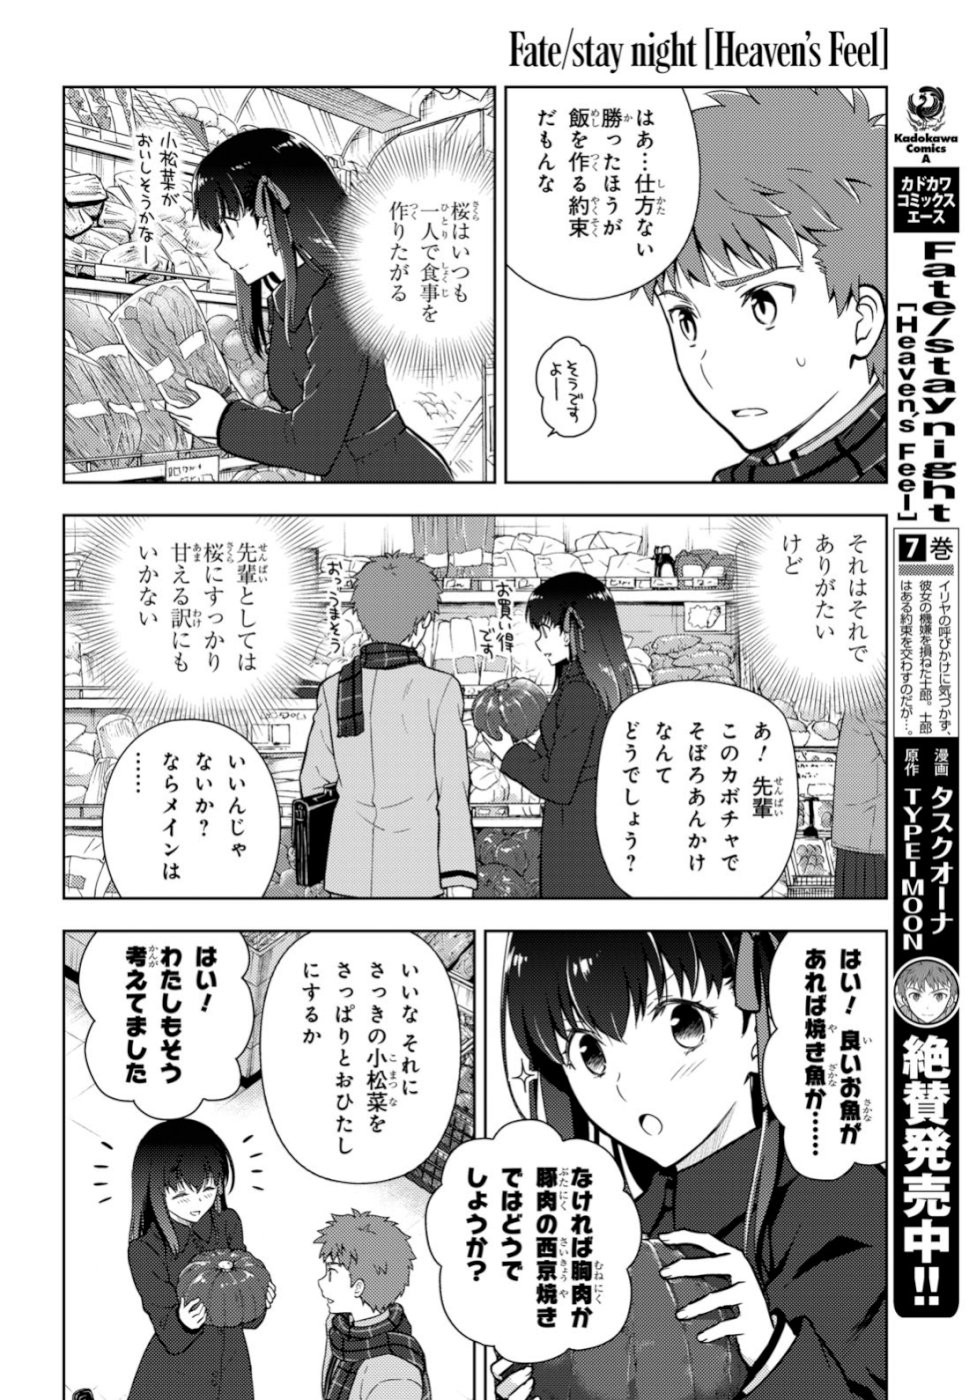 Fate/Stay night Heaven's Feel - Chapter 50 - Page 4